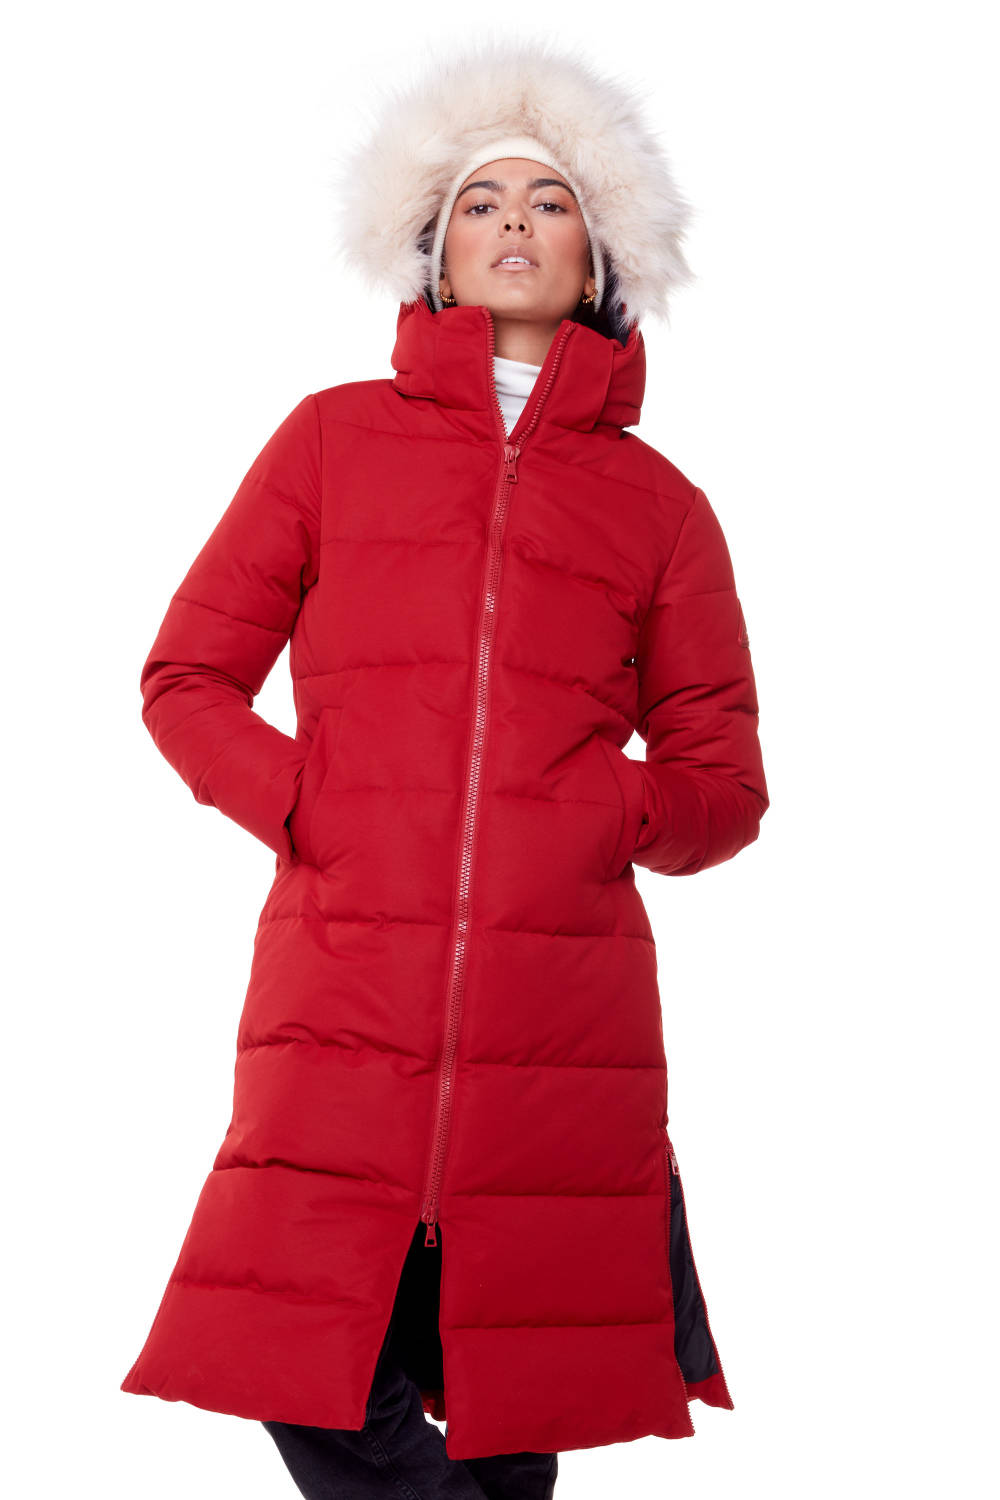 Alpine North Women's Vegan Down Recycled Ultra Long Winter Parka - Water Repellent, Windproof, Insulated Jacket with Hood